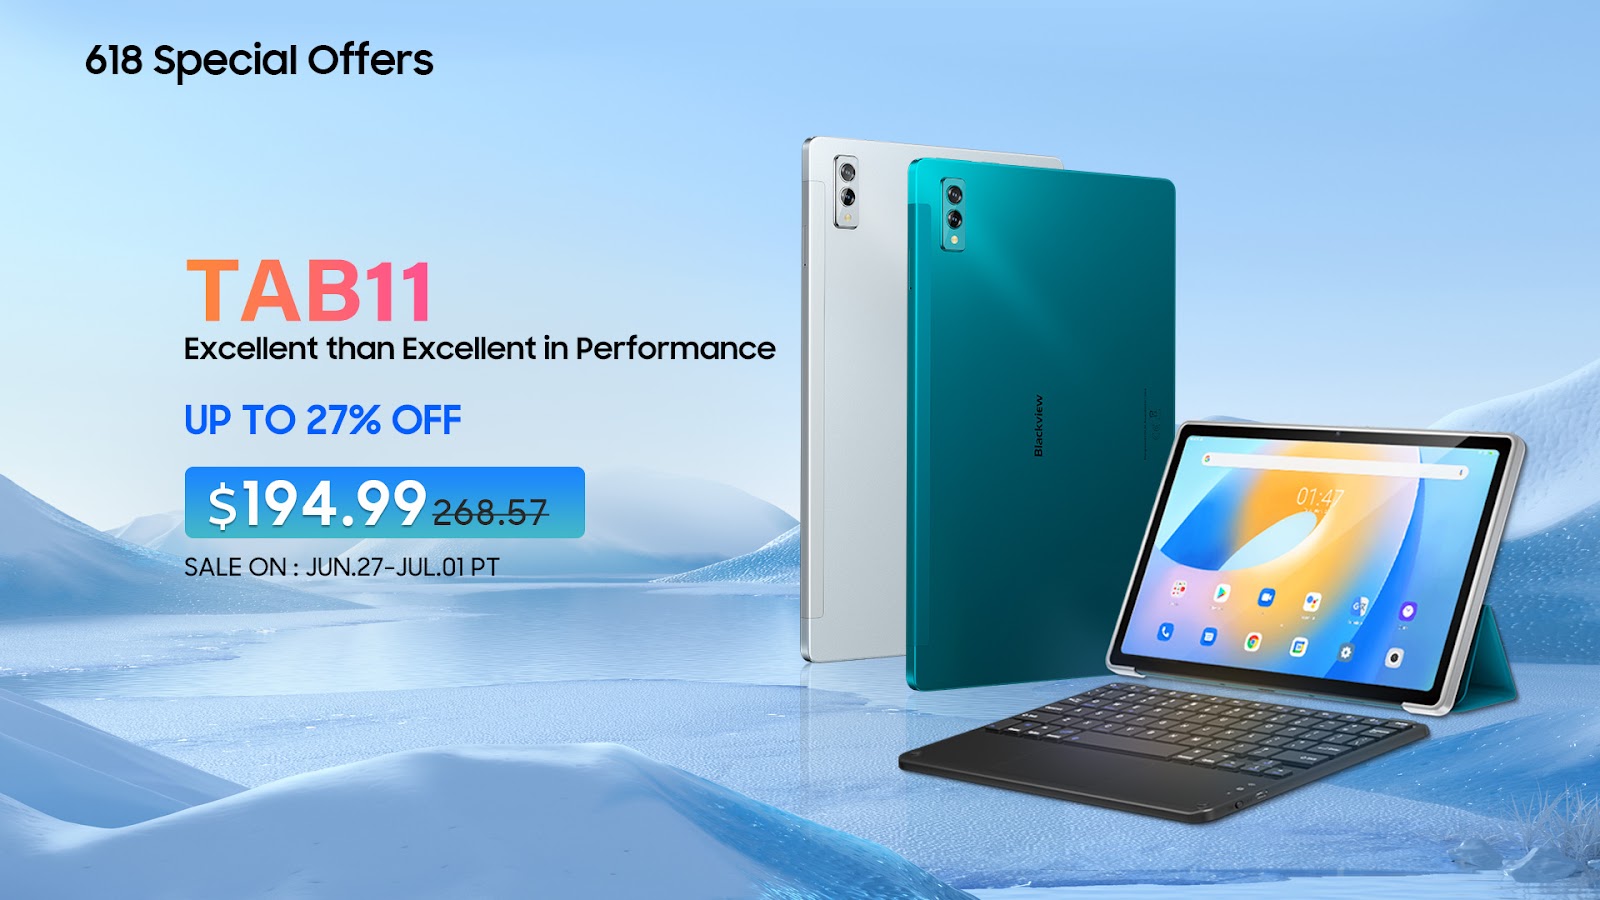 Blackview 618 summer sale 2022 goes live; massive discounts up to $264 off img 62b57cd5b89bd